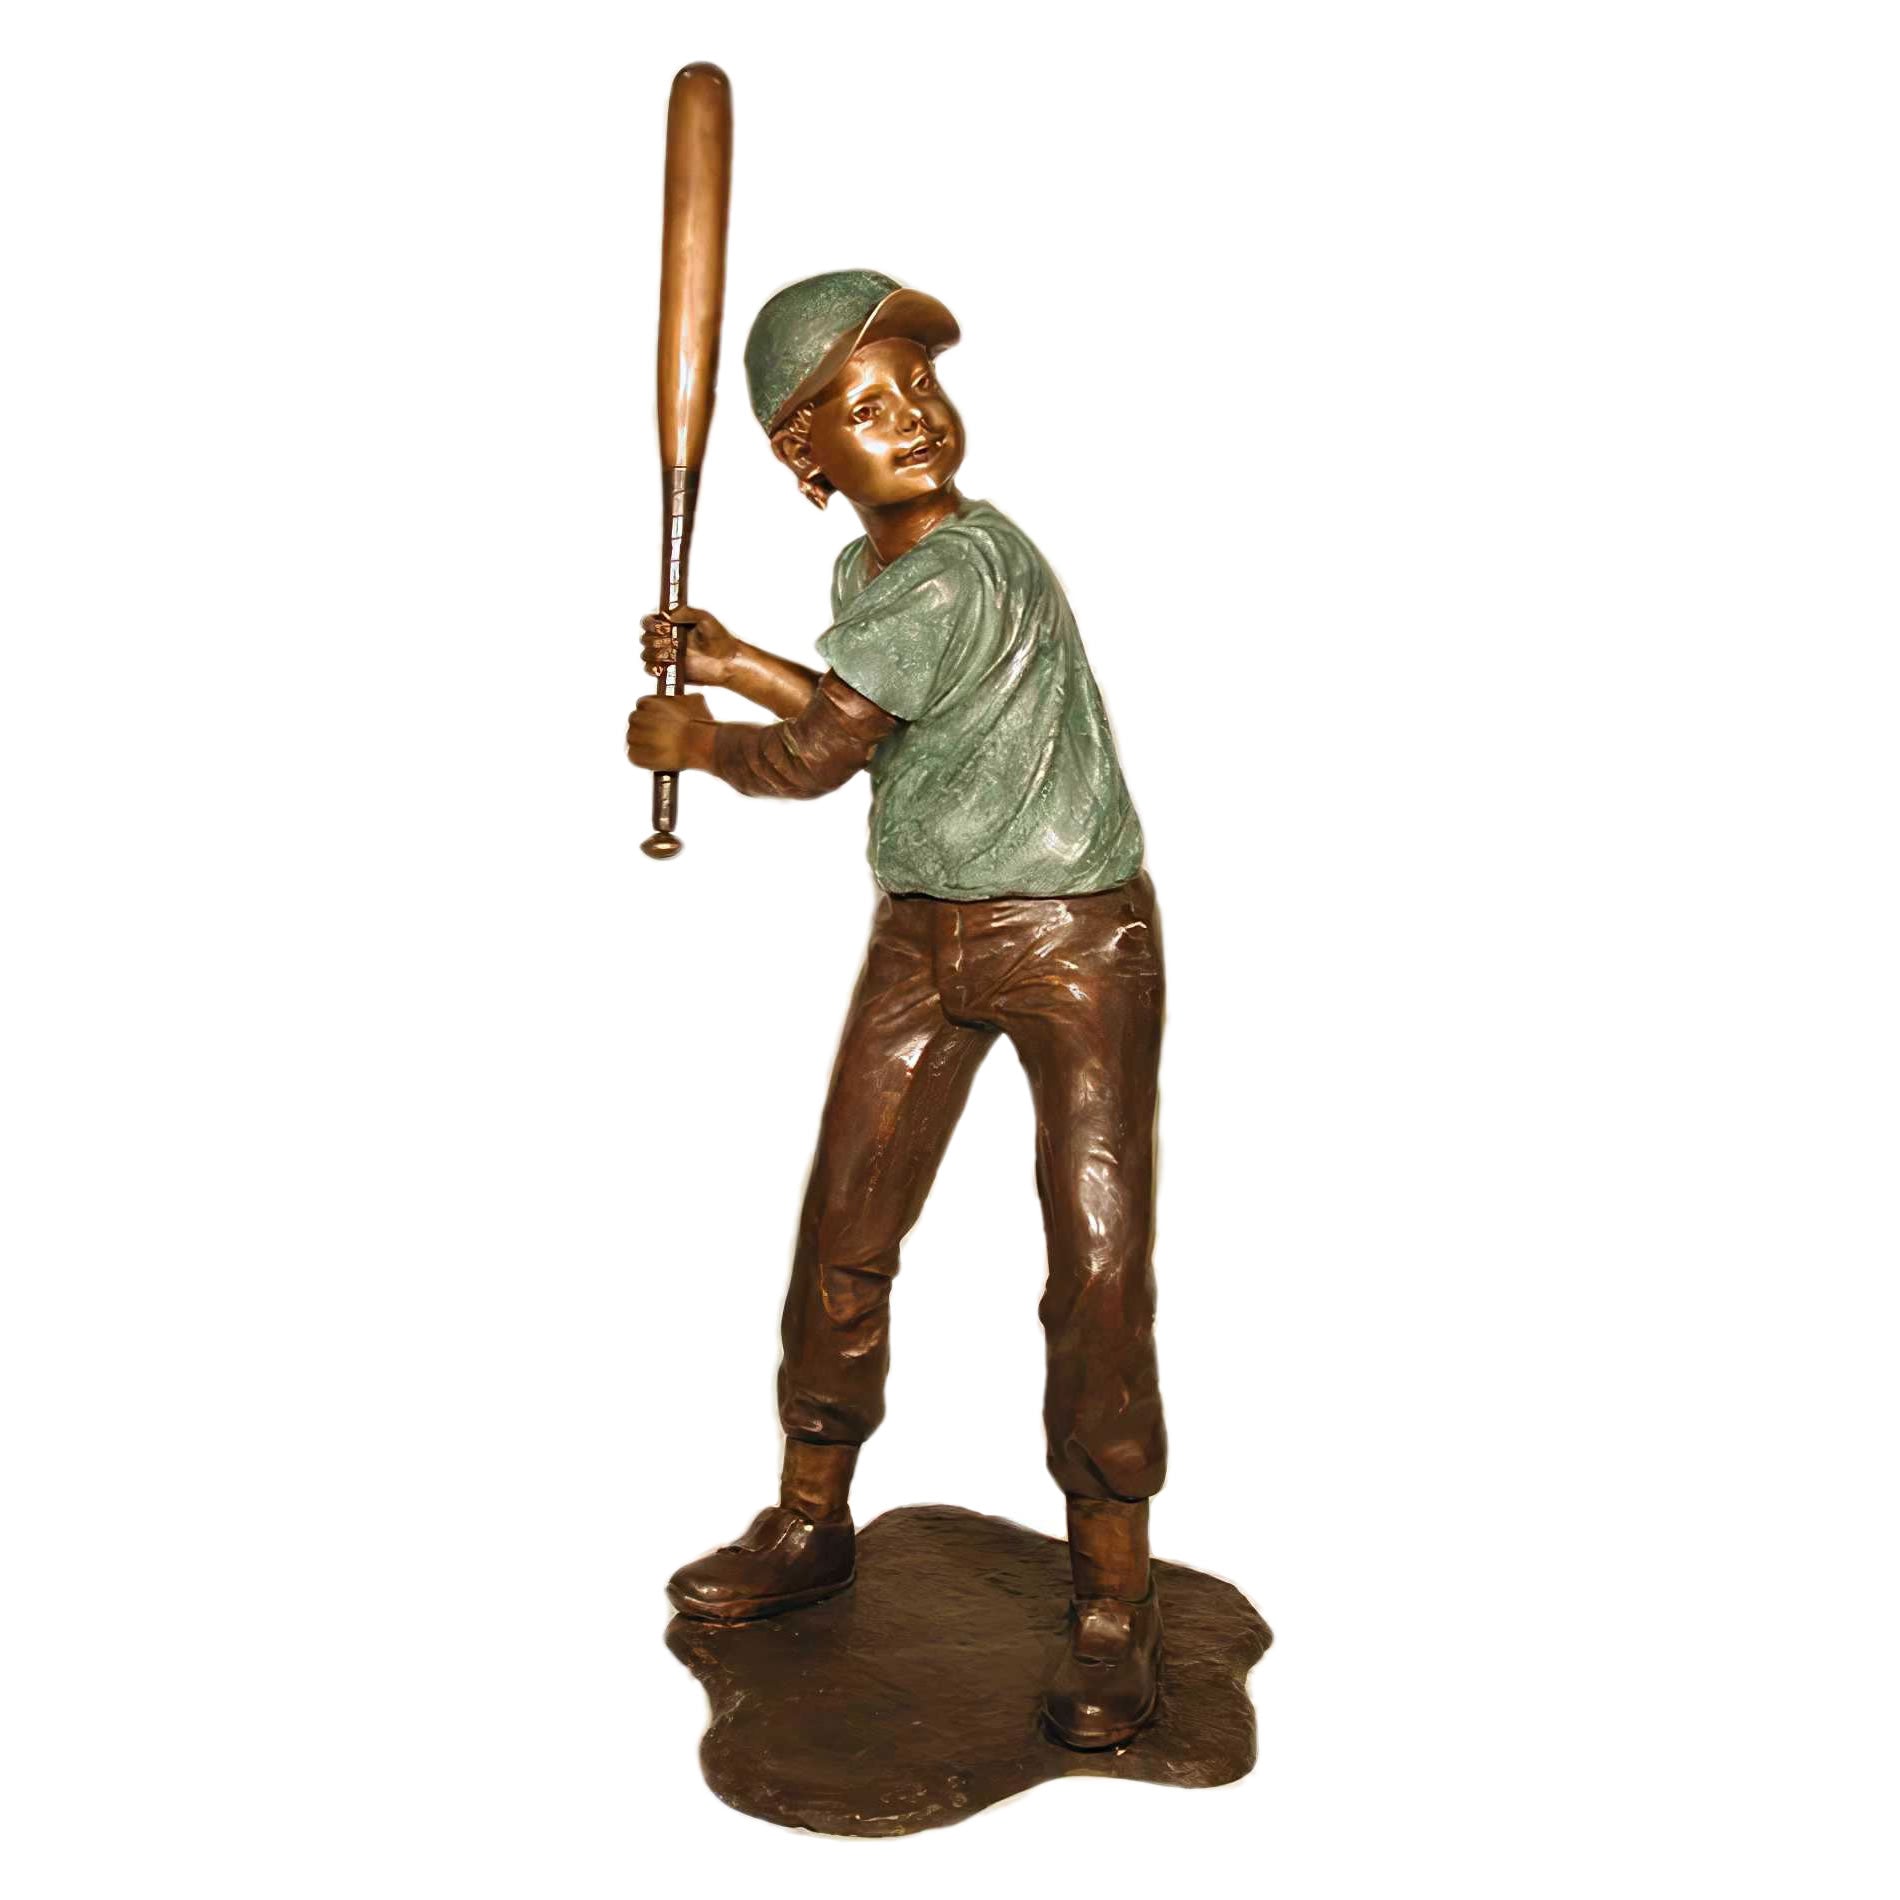 Young Boy Baseball Player Statue (With Bat)